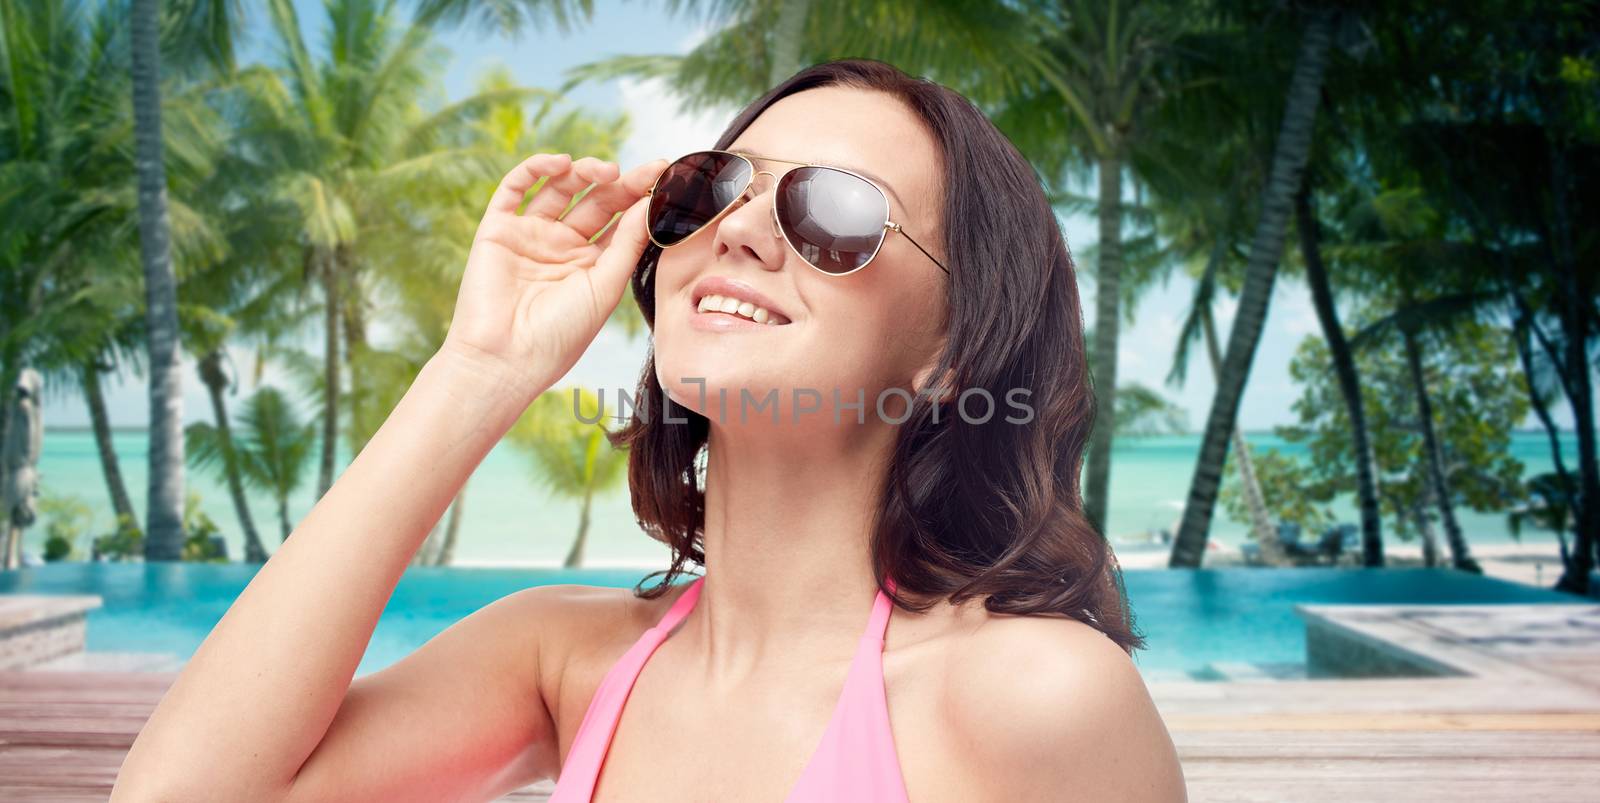 happy woman in sunglasses and swimsuit by dolgachov